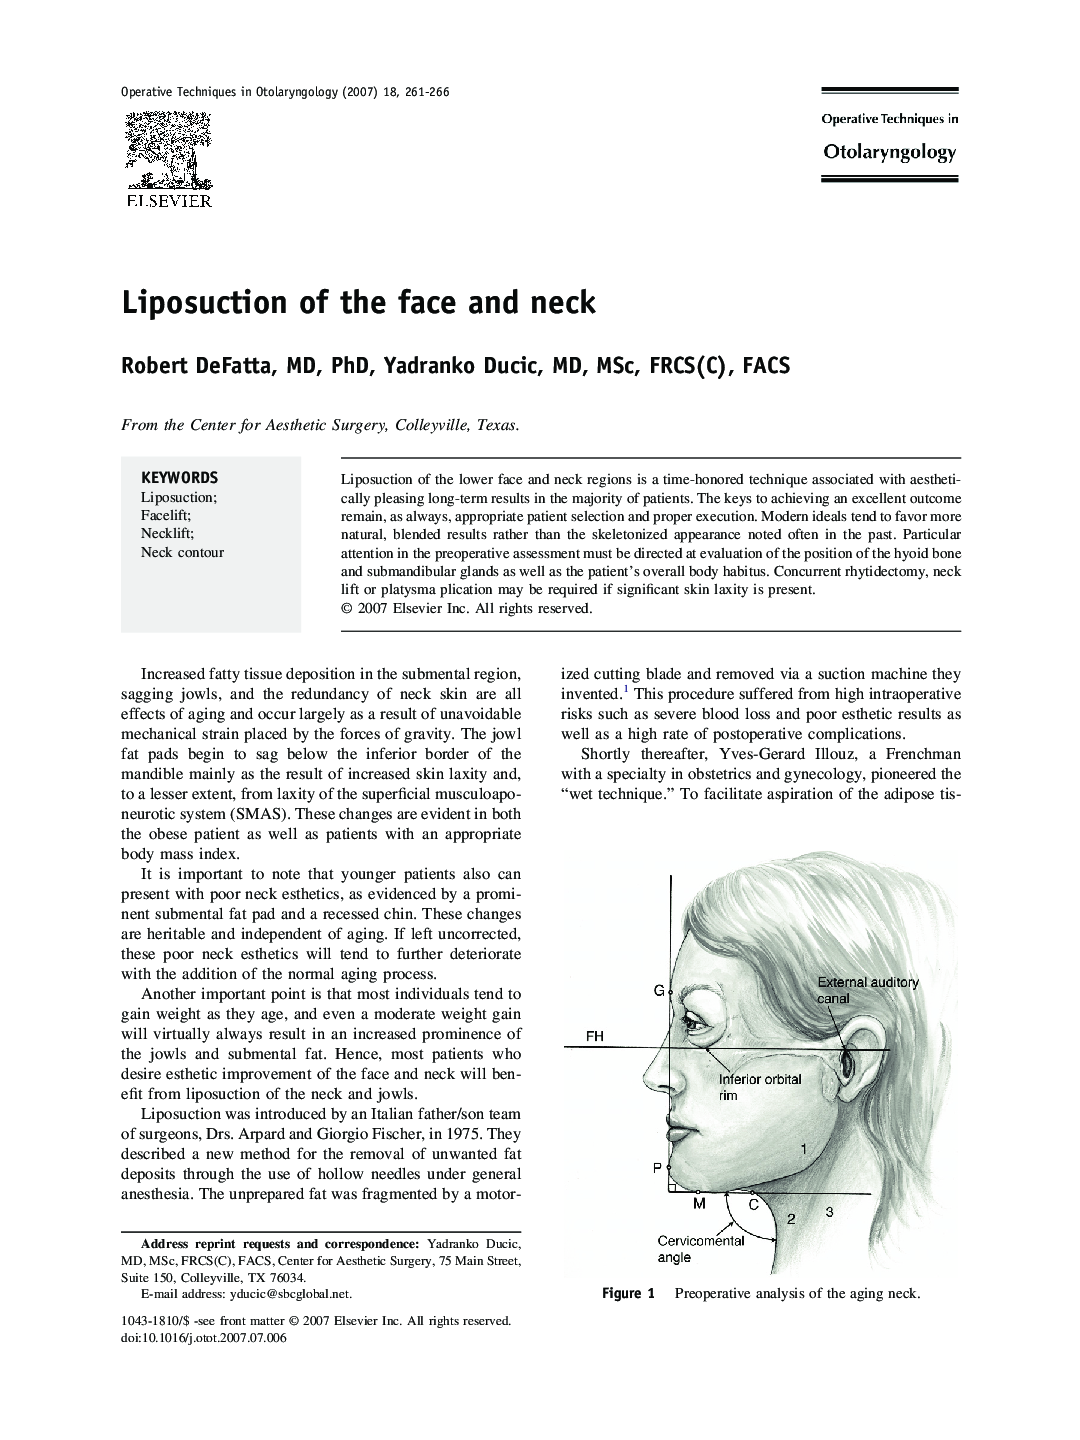 Liposuction of the face and neck